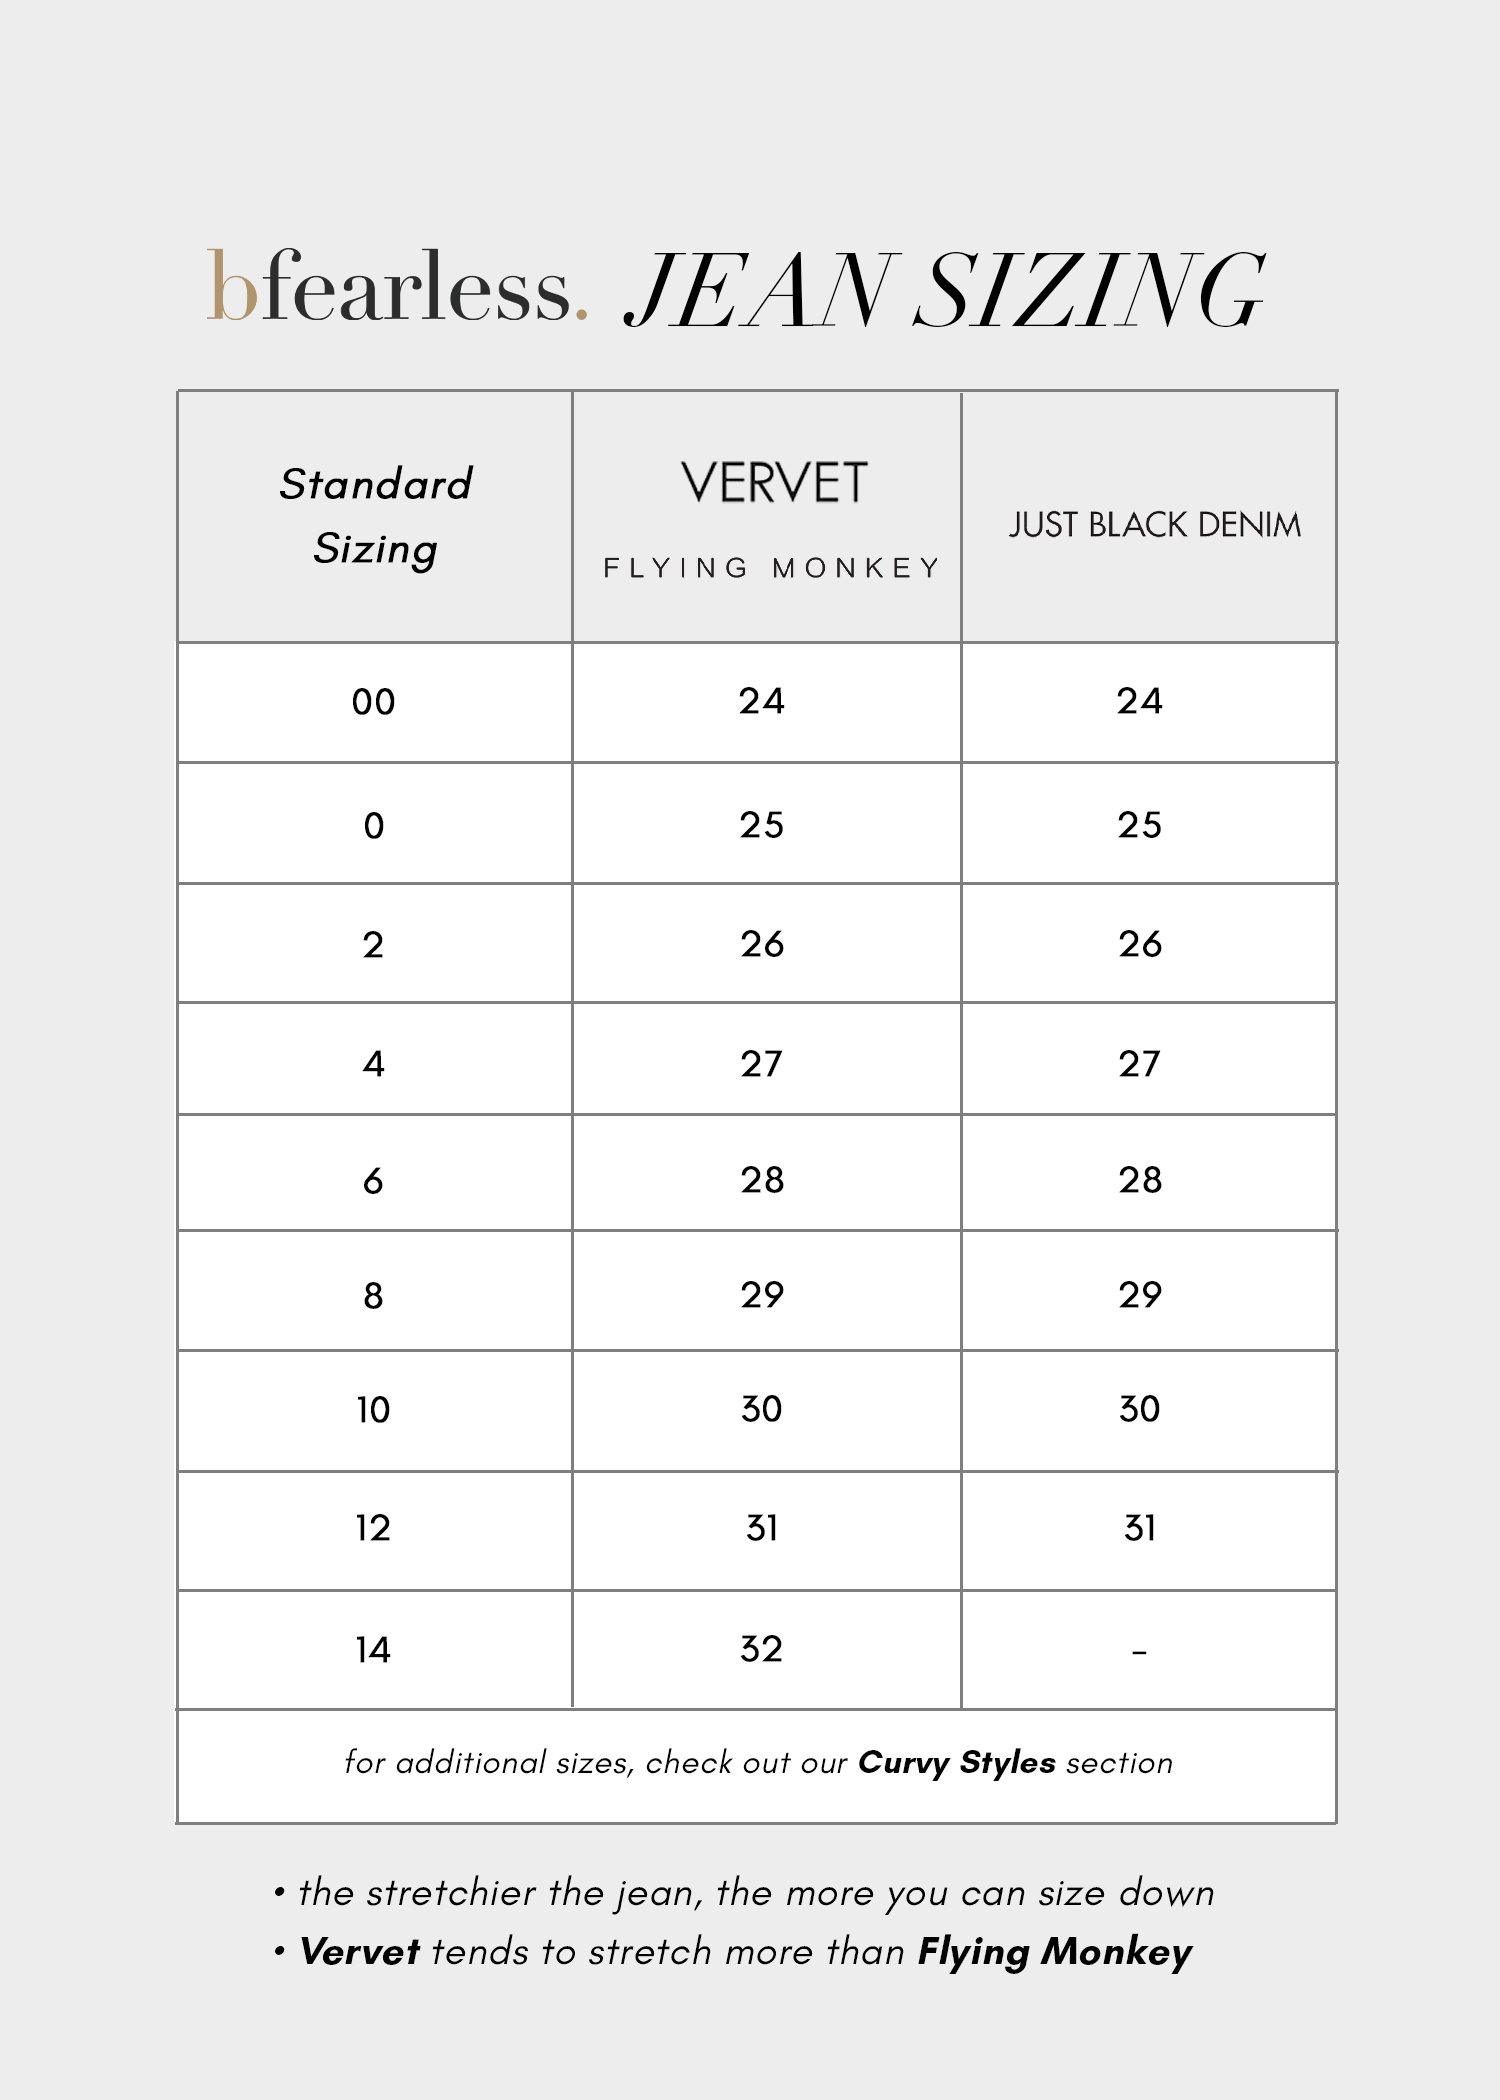 JEAN SIZING GUIDE — bfearless. INSPIRE & BE INSPIRED